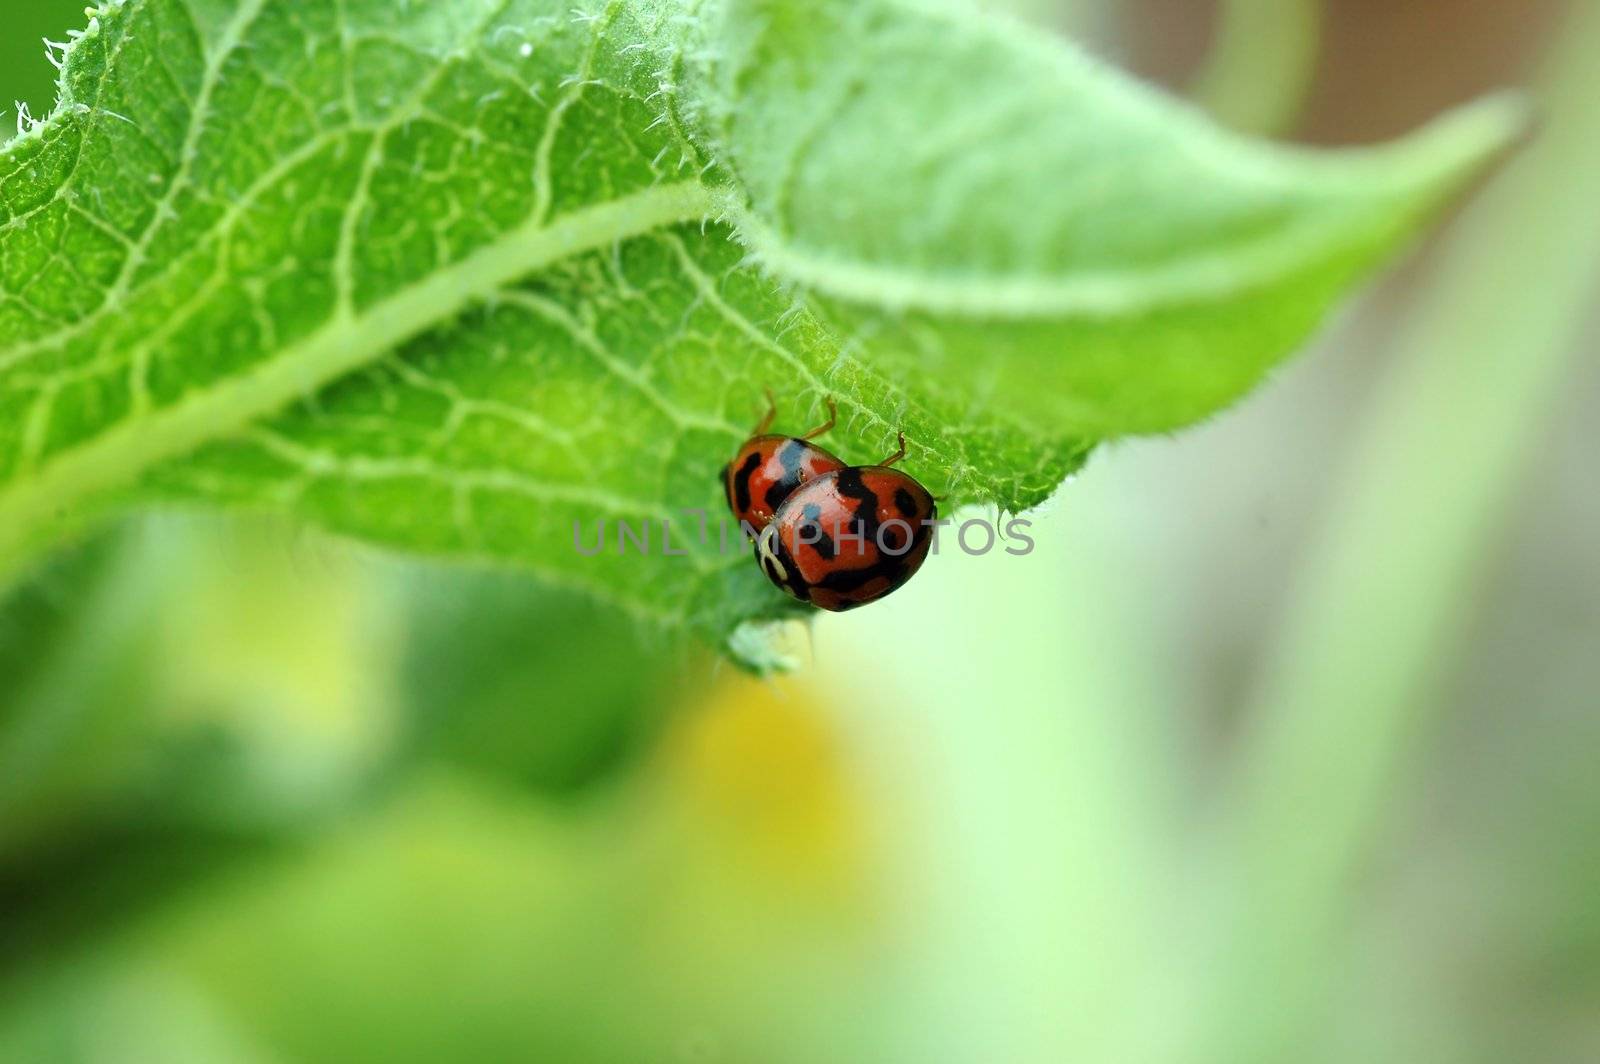 Ladybird Mating by khwi